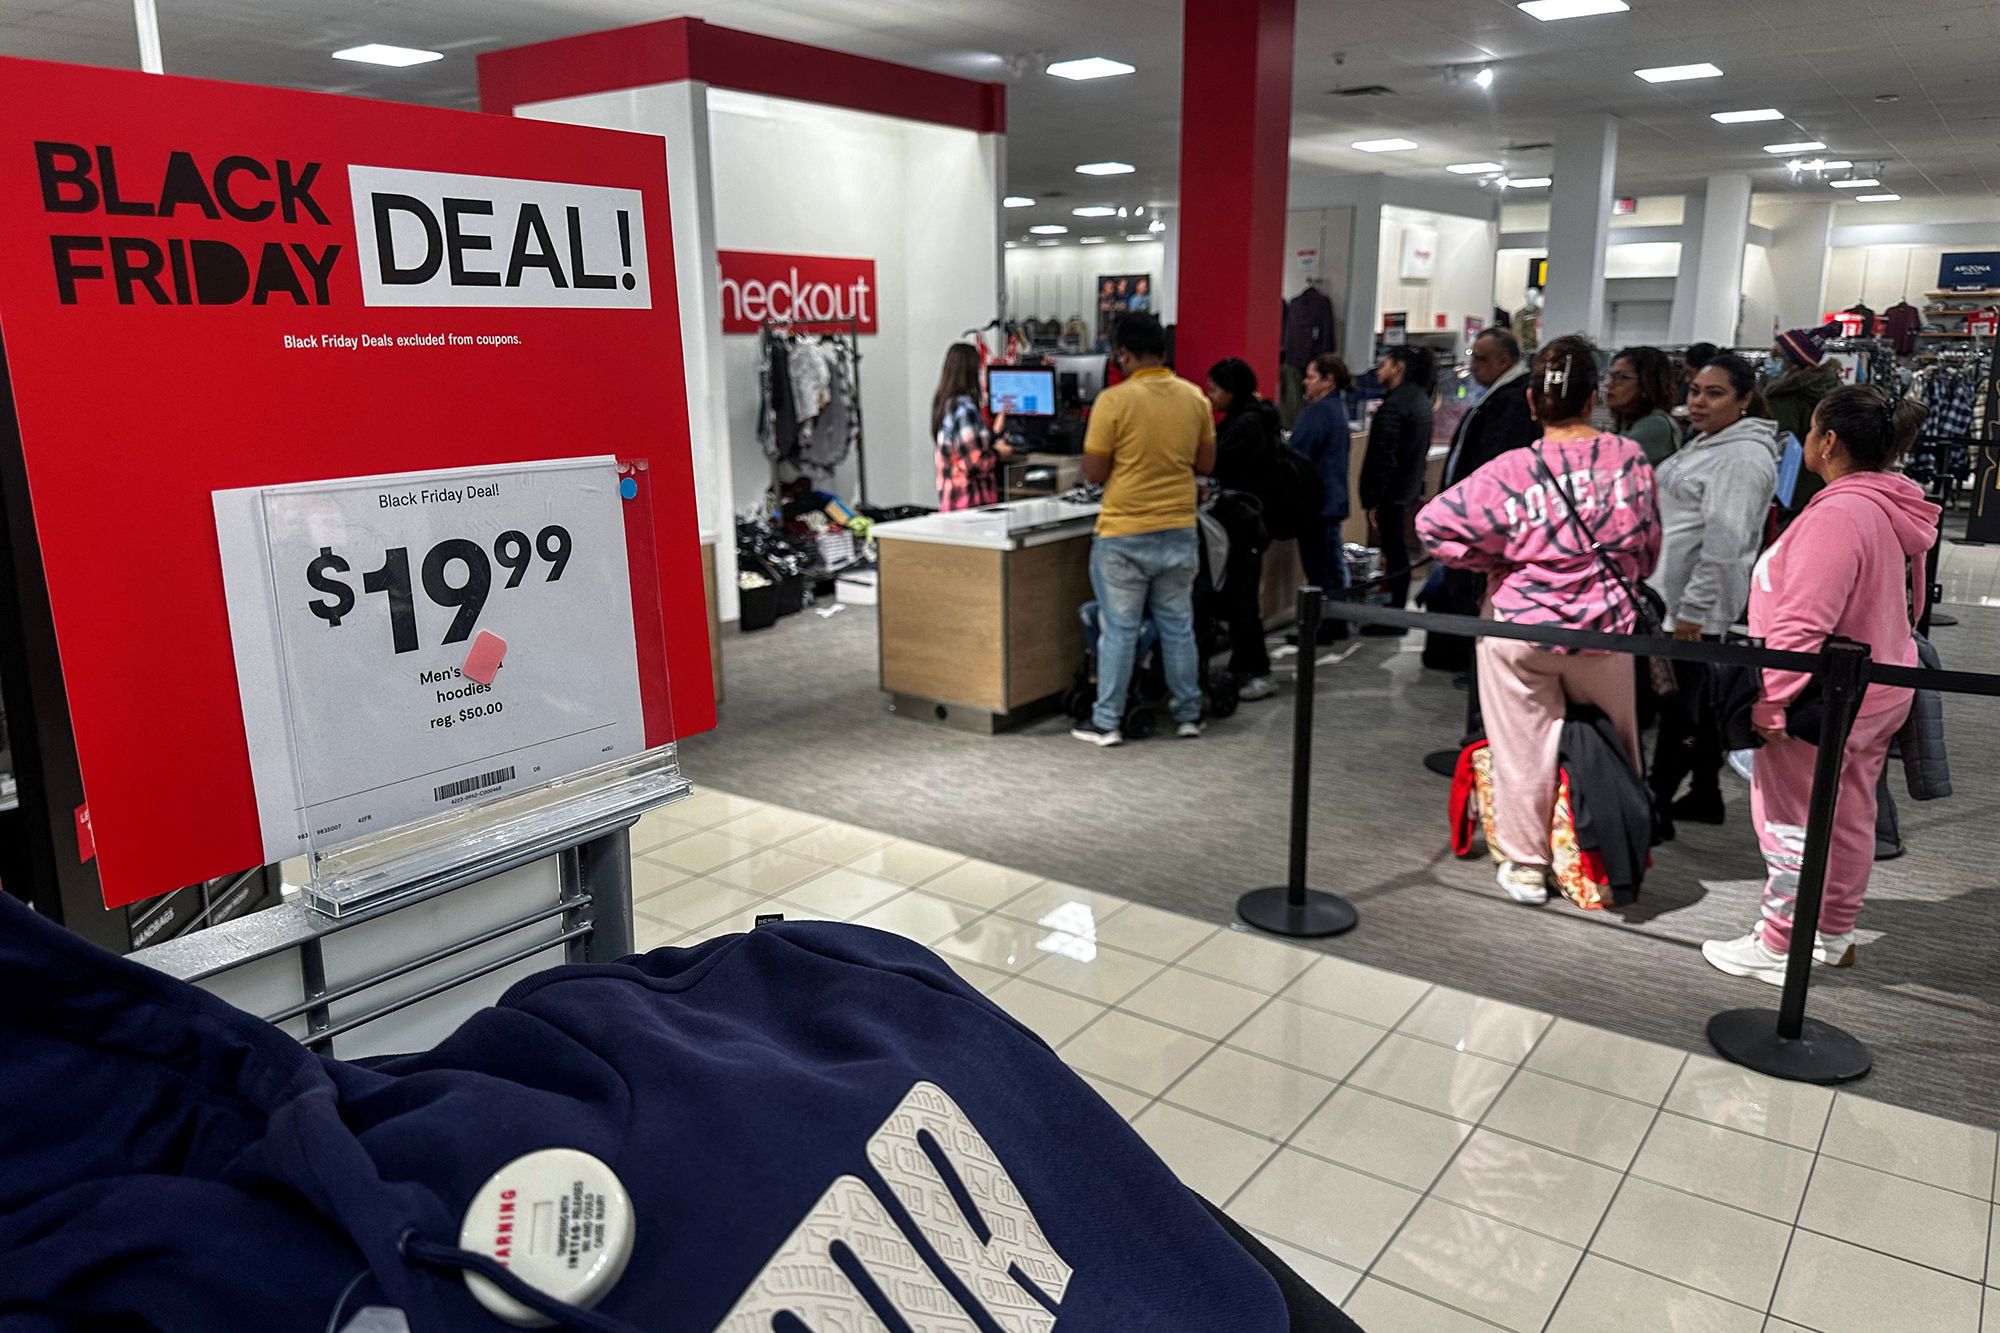 It's not Black Friday yet — but the price slashing has already started